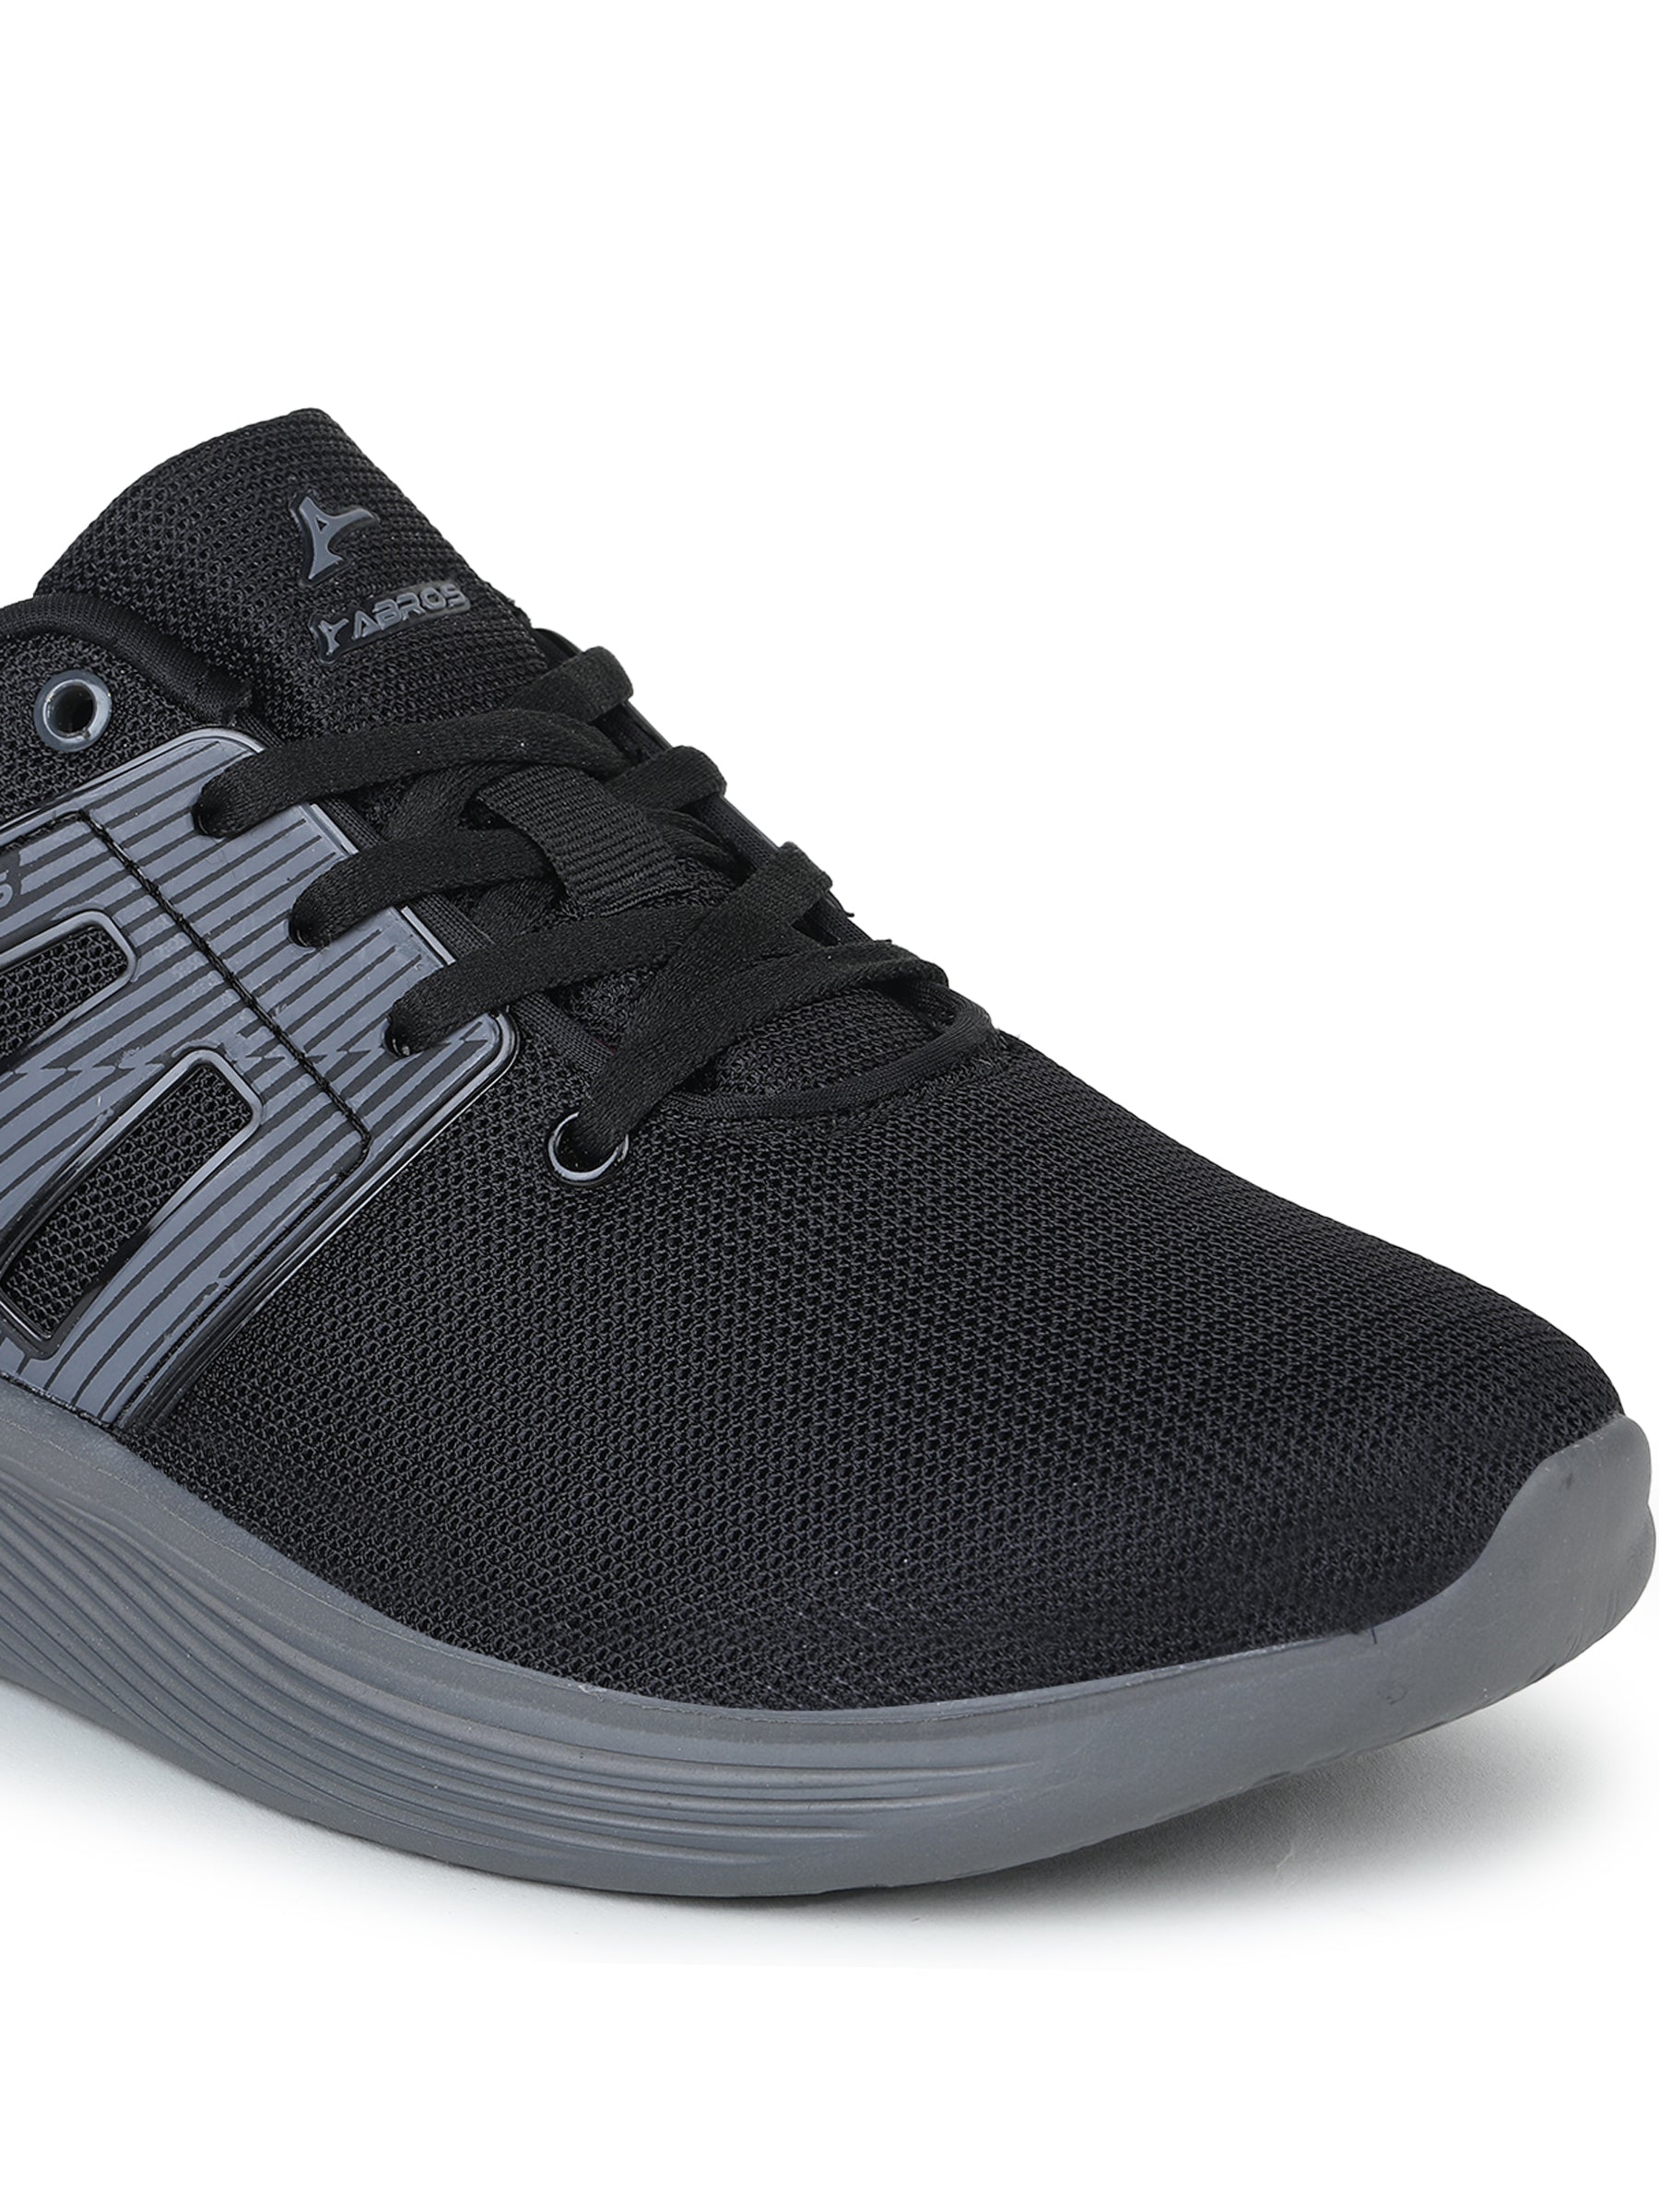 LINUX RUNNING SPORTS SHOES FOR MEN